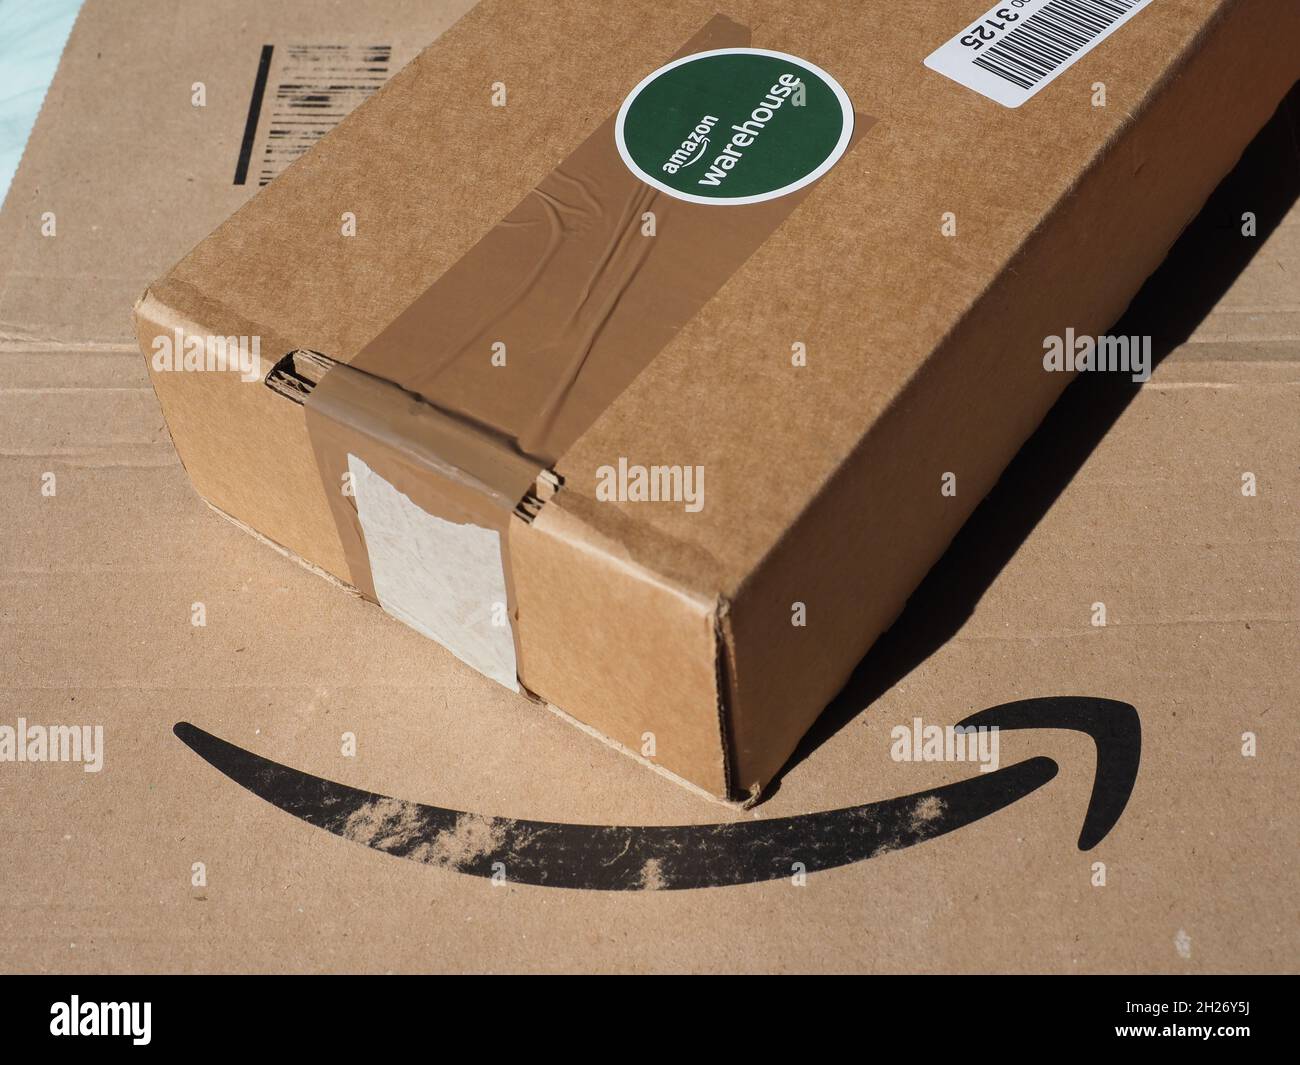 https://c8.alamy.com/comp/2H26Y5J/seattle-usa-circa-october-2021-amazon-warehouse-offers-great-deals-on-quality-used-pre-owned-or-open-box-products-2H26Y5J.jpg